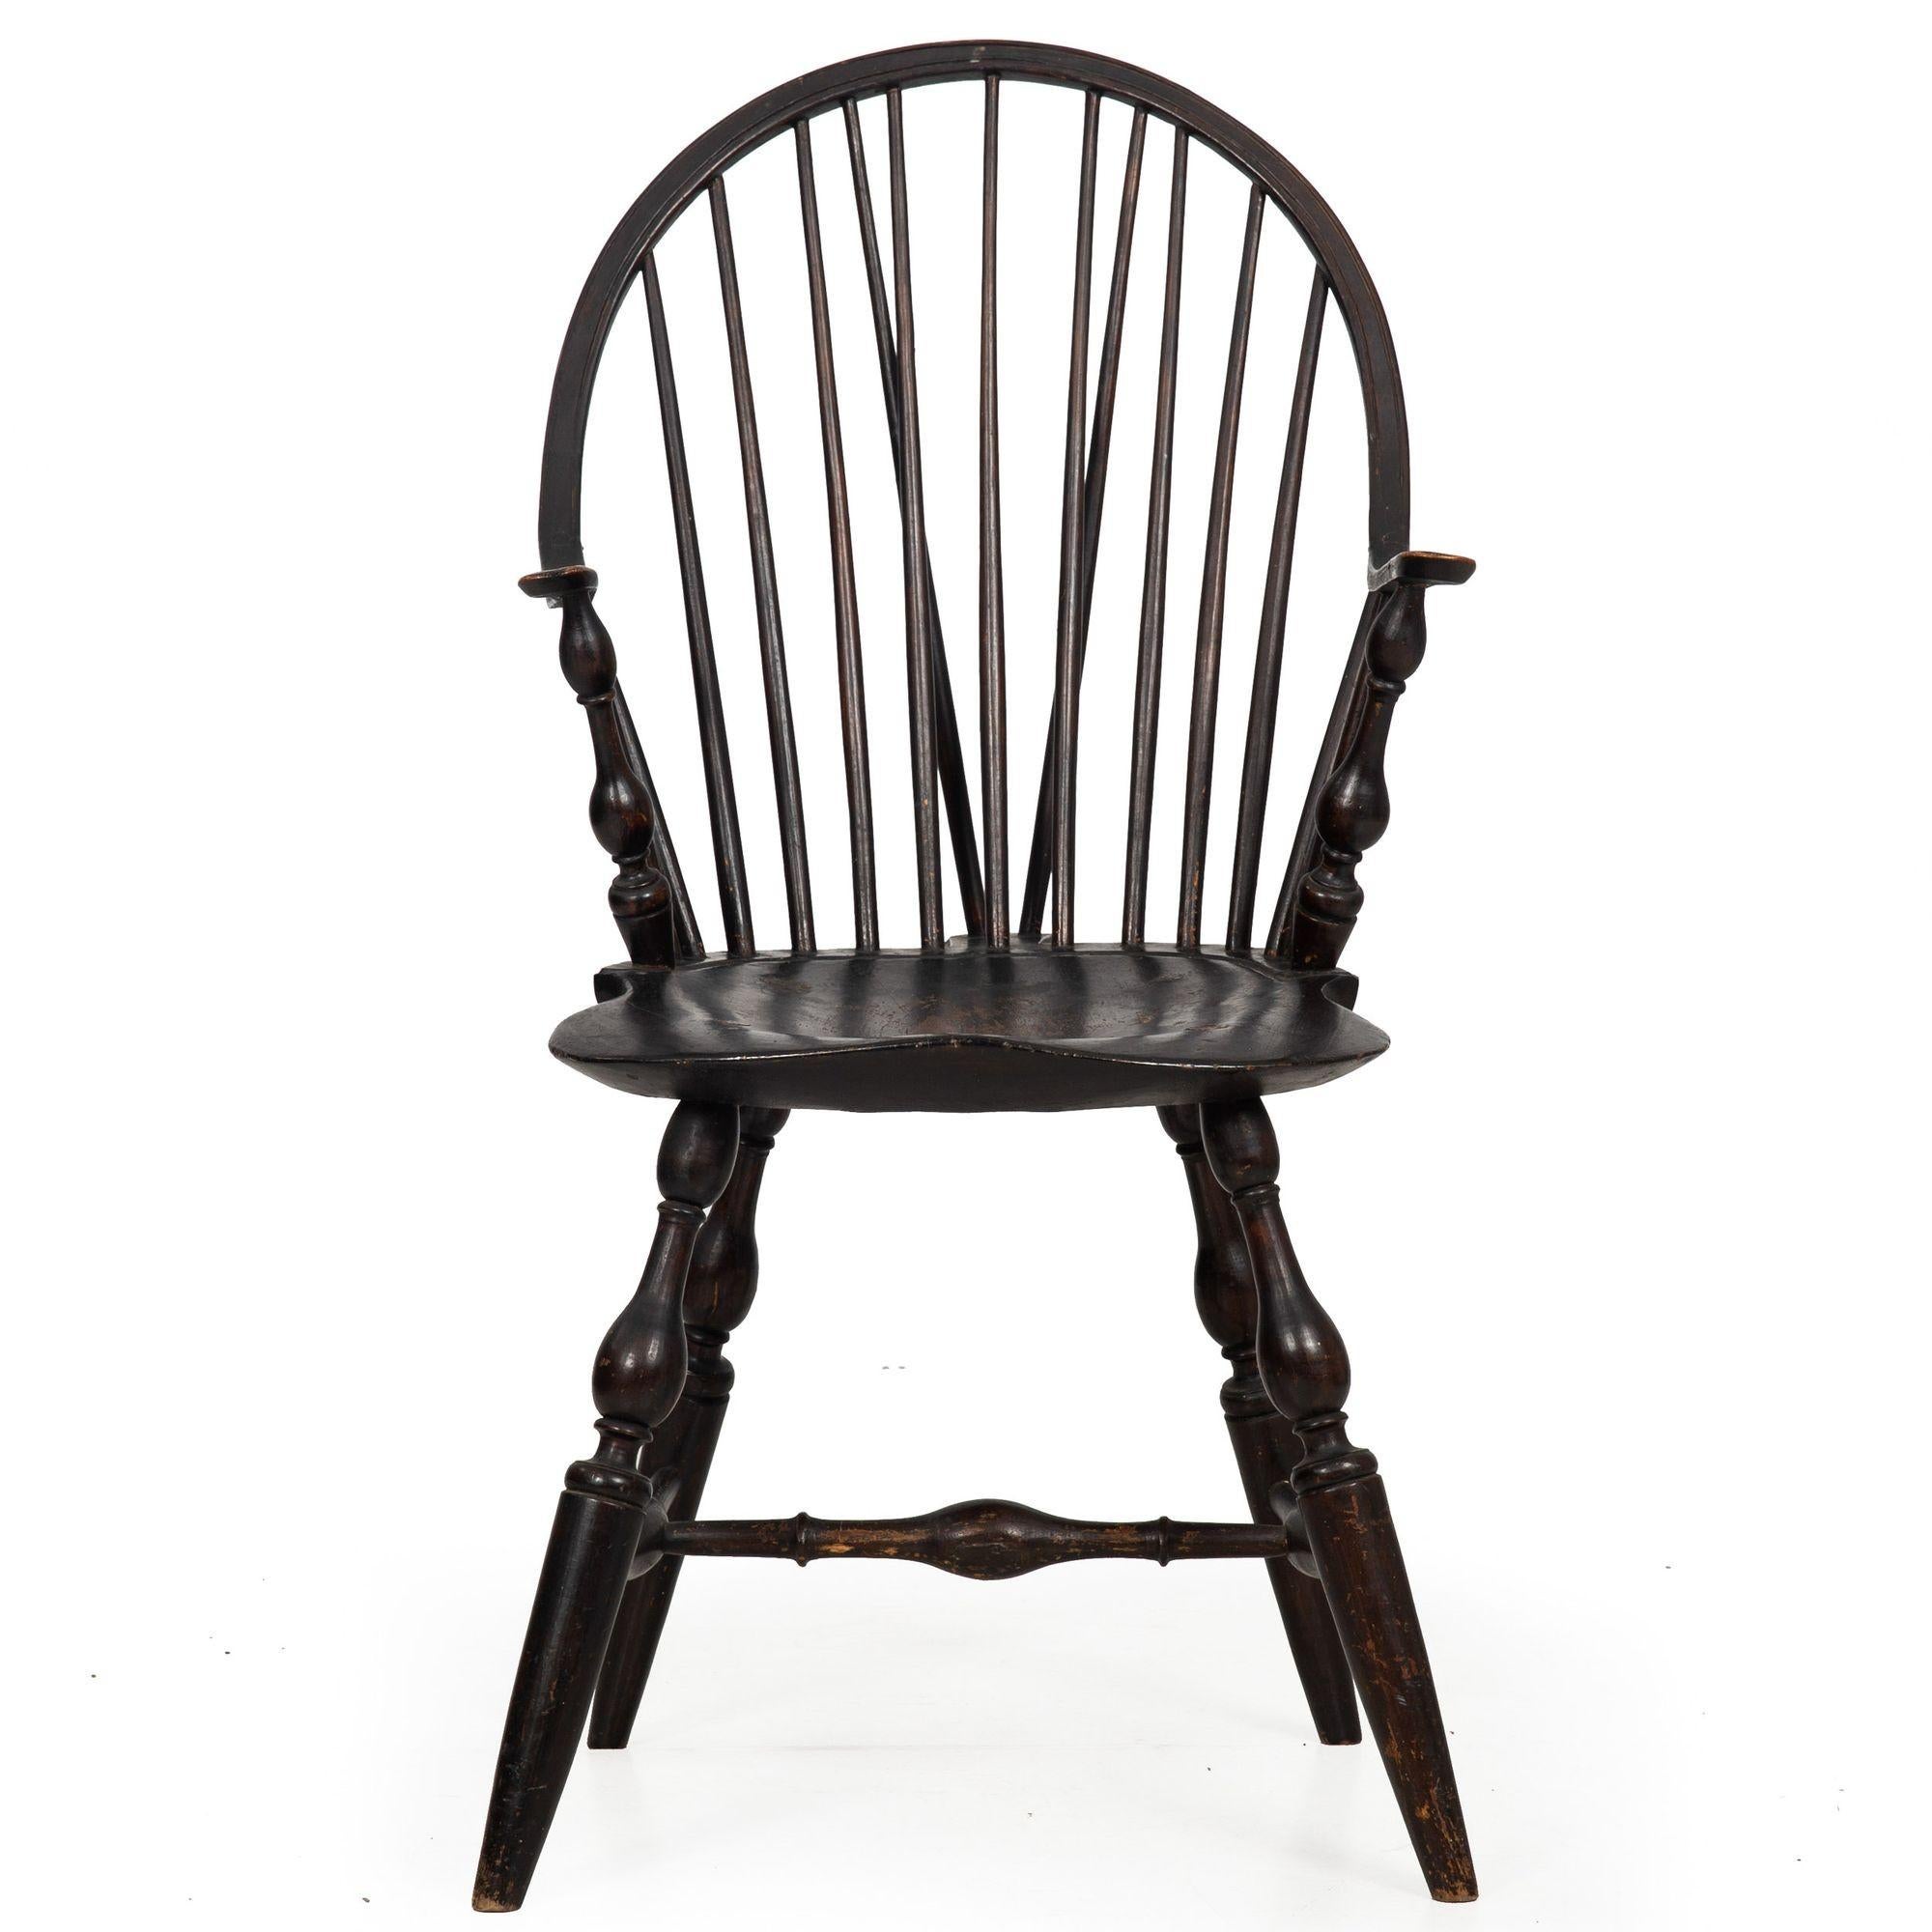 AMERICAN BRACE-BACK CONTINUOUS-ARM WINDSOR CHAIR
New York, ca. 1790  retaining an early nearly black painted surface
Item # 310LJI05P
A very fine continuous-arm windsor chair with a brace-back form, it retains an early and beautifully oxidized black